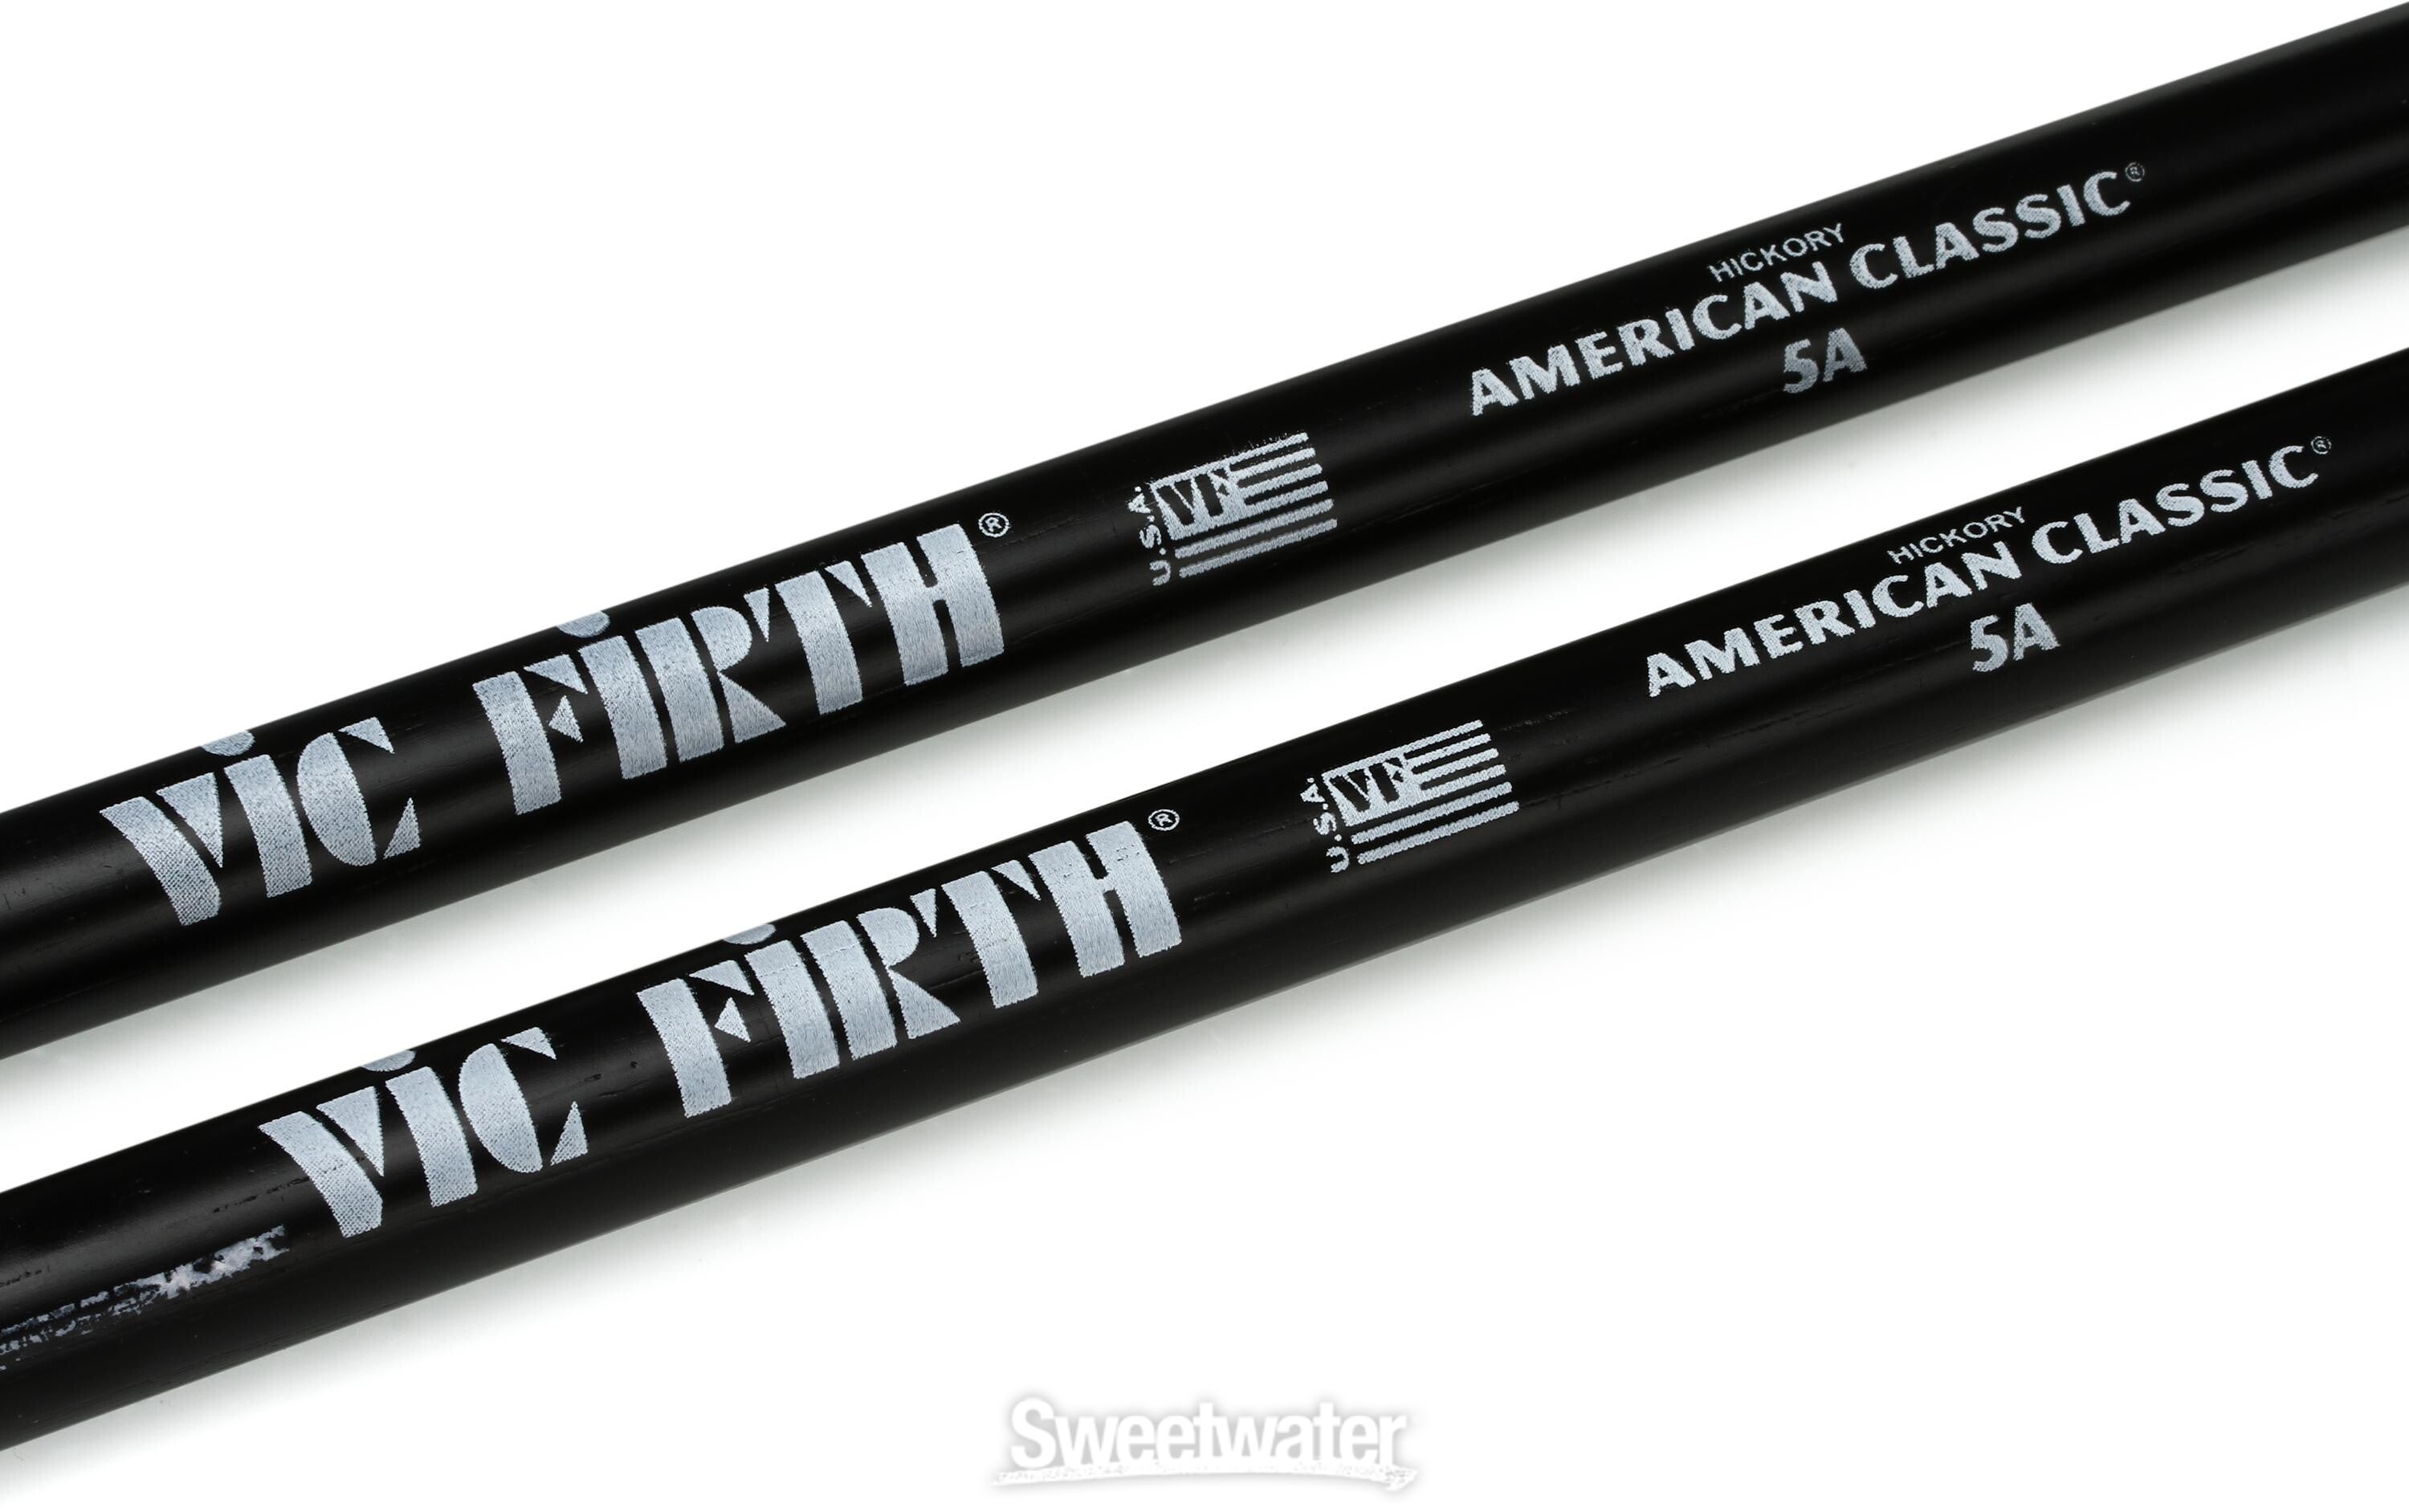 Vic Firth American Classic 4 for 3 Drumstick Pack - 5A, Black (4